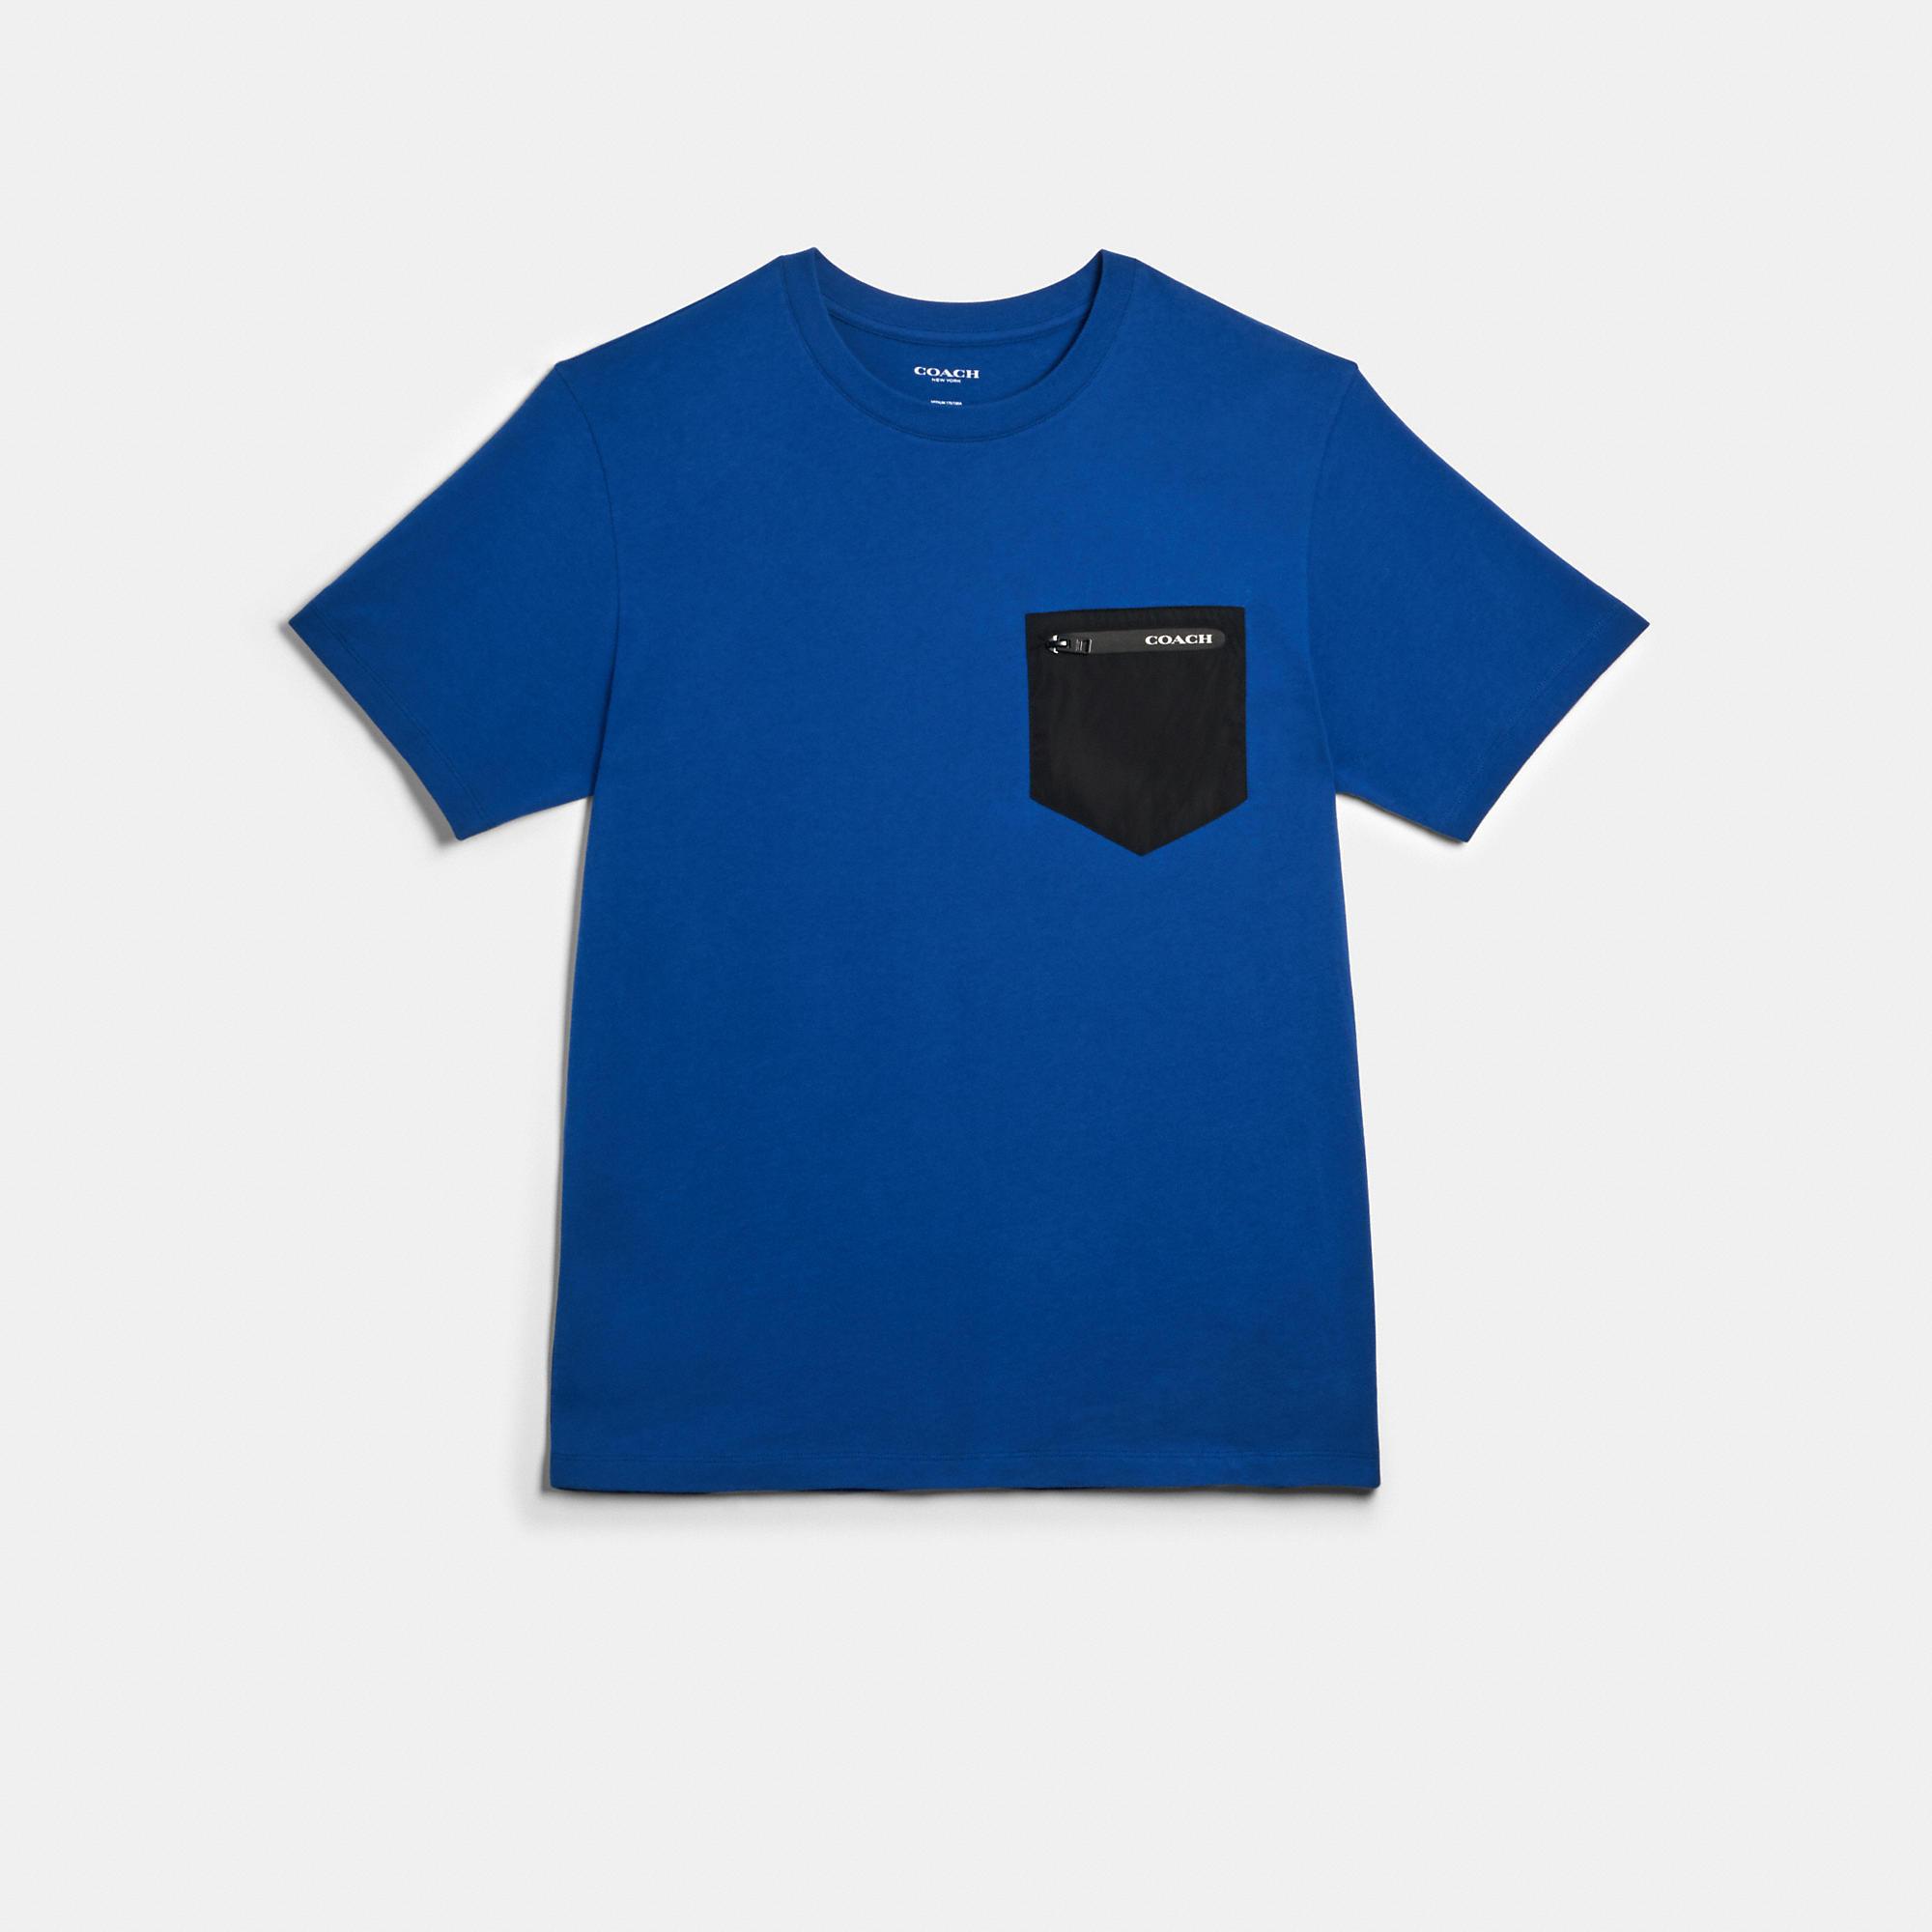 COACH Cotton Mixed Media T-shirt in Sapphire (Blue) for Men - Lyst